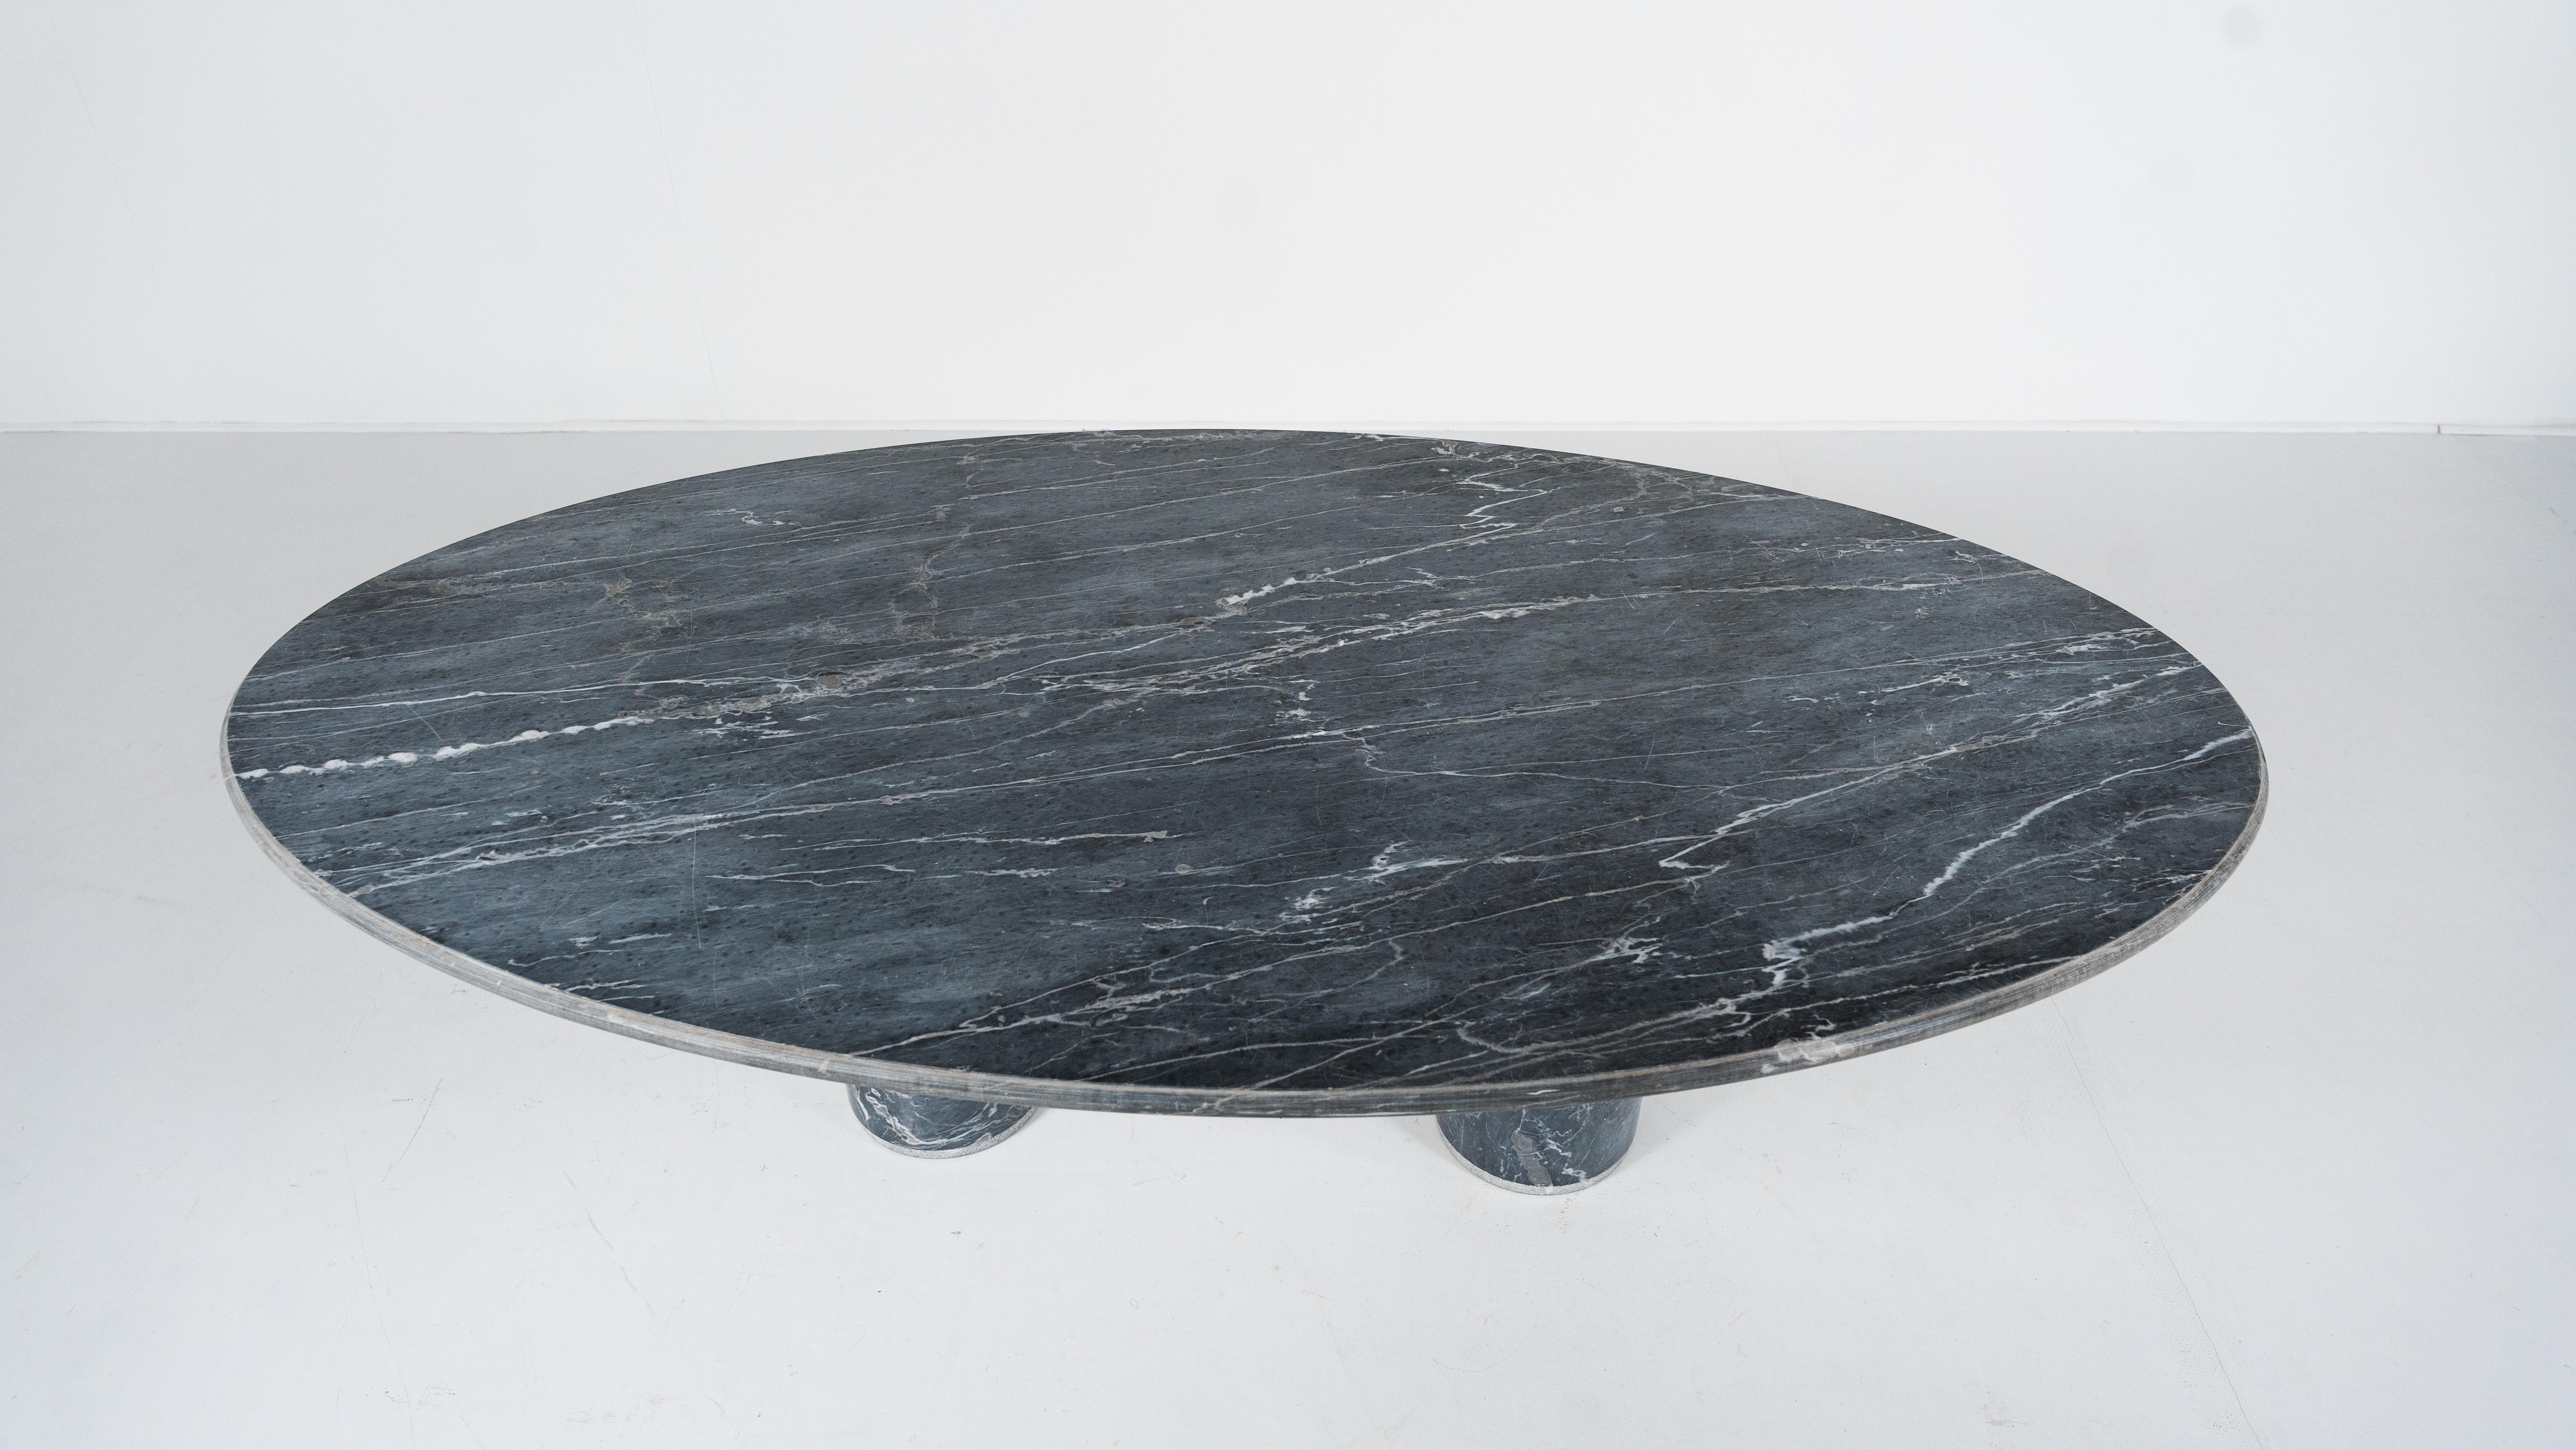 Ovale del Giardiniere Table by Achille Castiglioni for Upgroup, Marble, 1980s For Sale 2